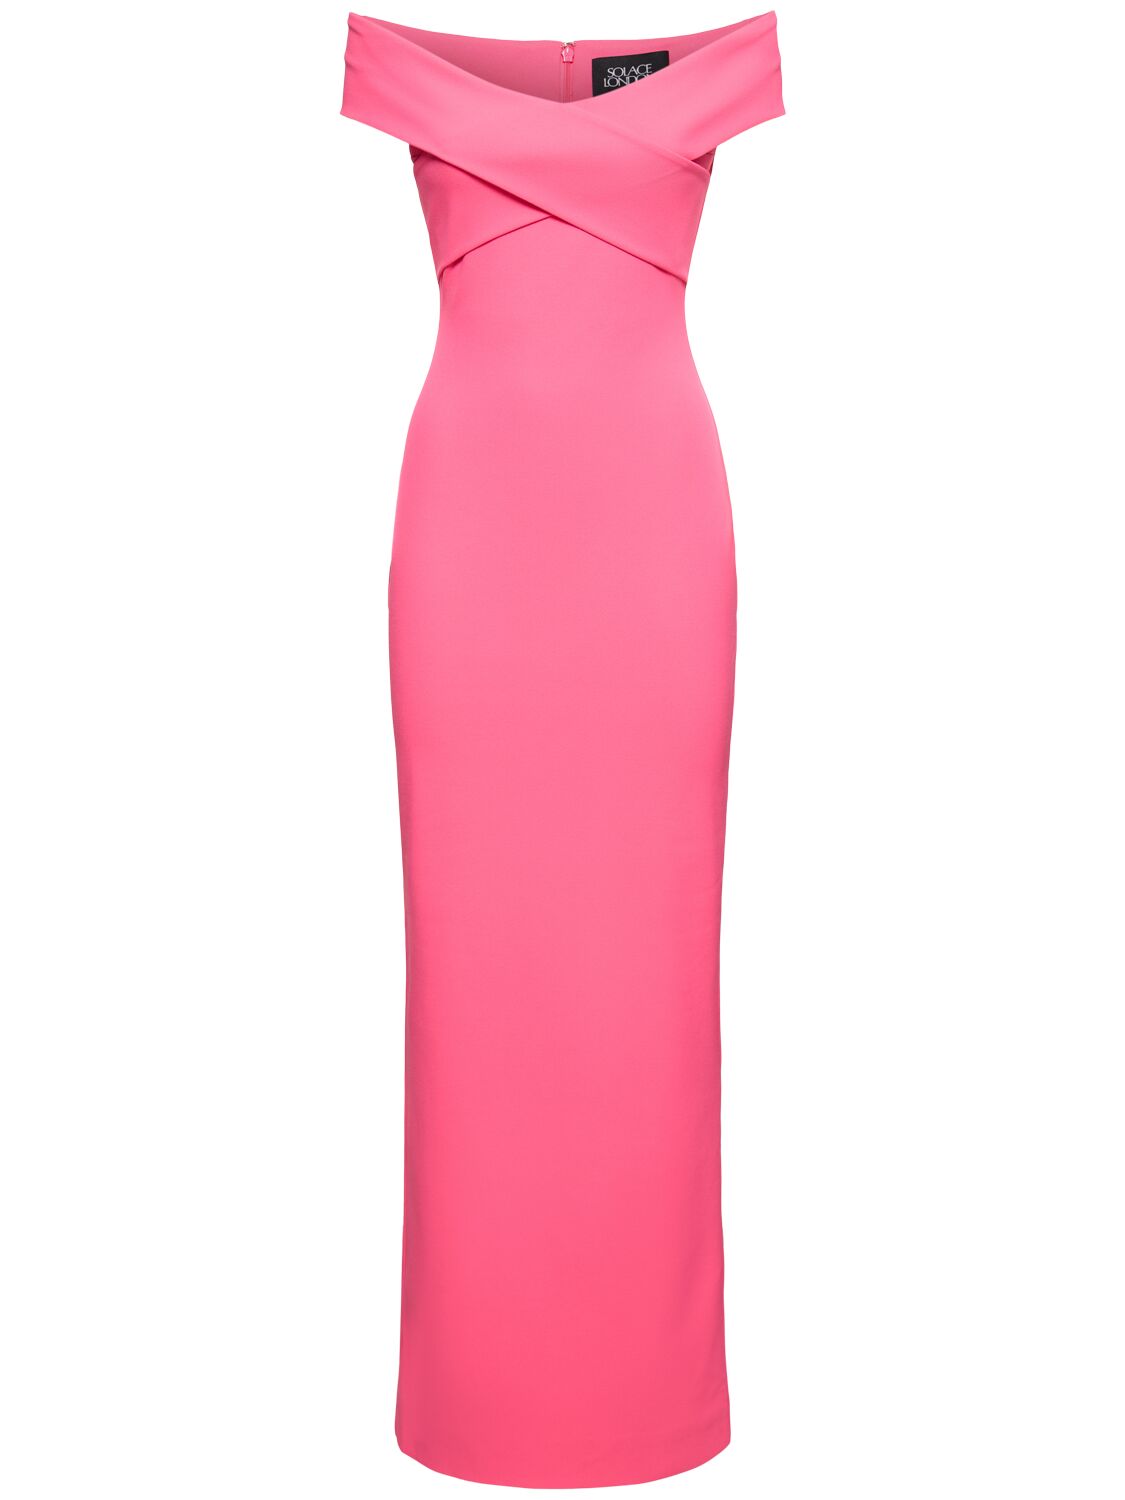 Solace London Inex Crepe Knit Midi Dress In Pink